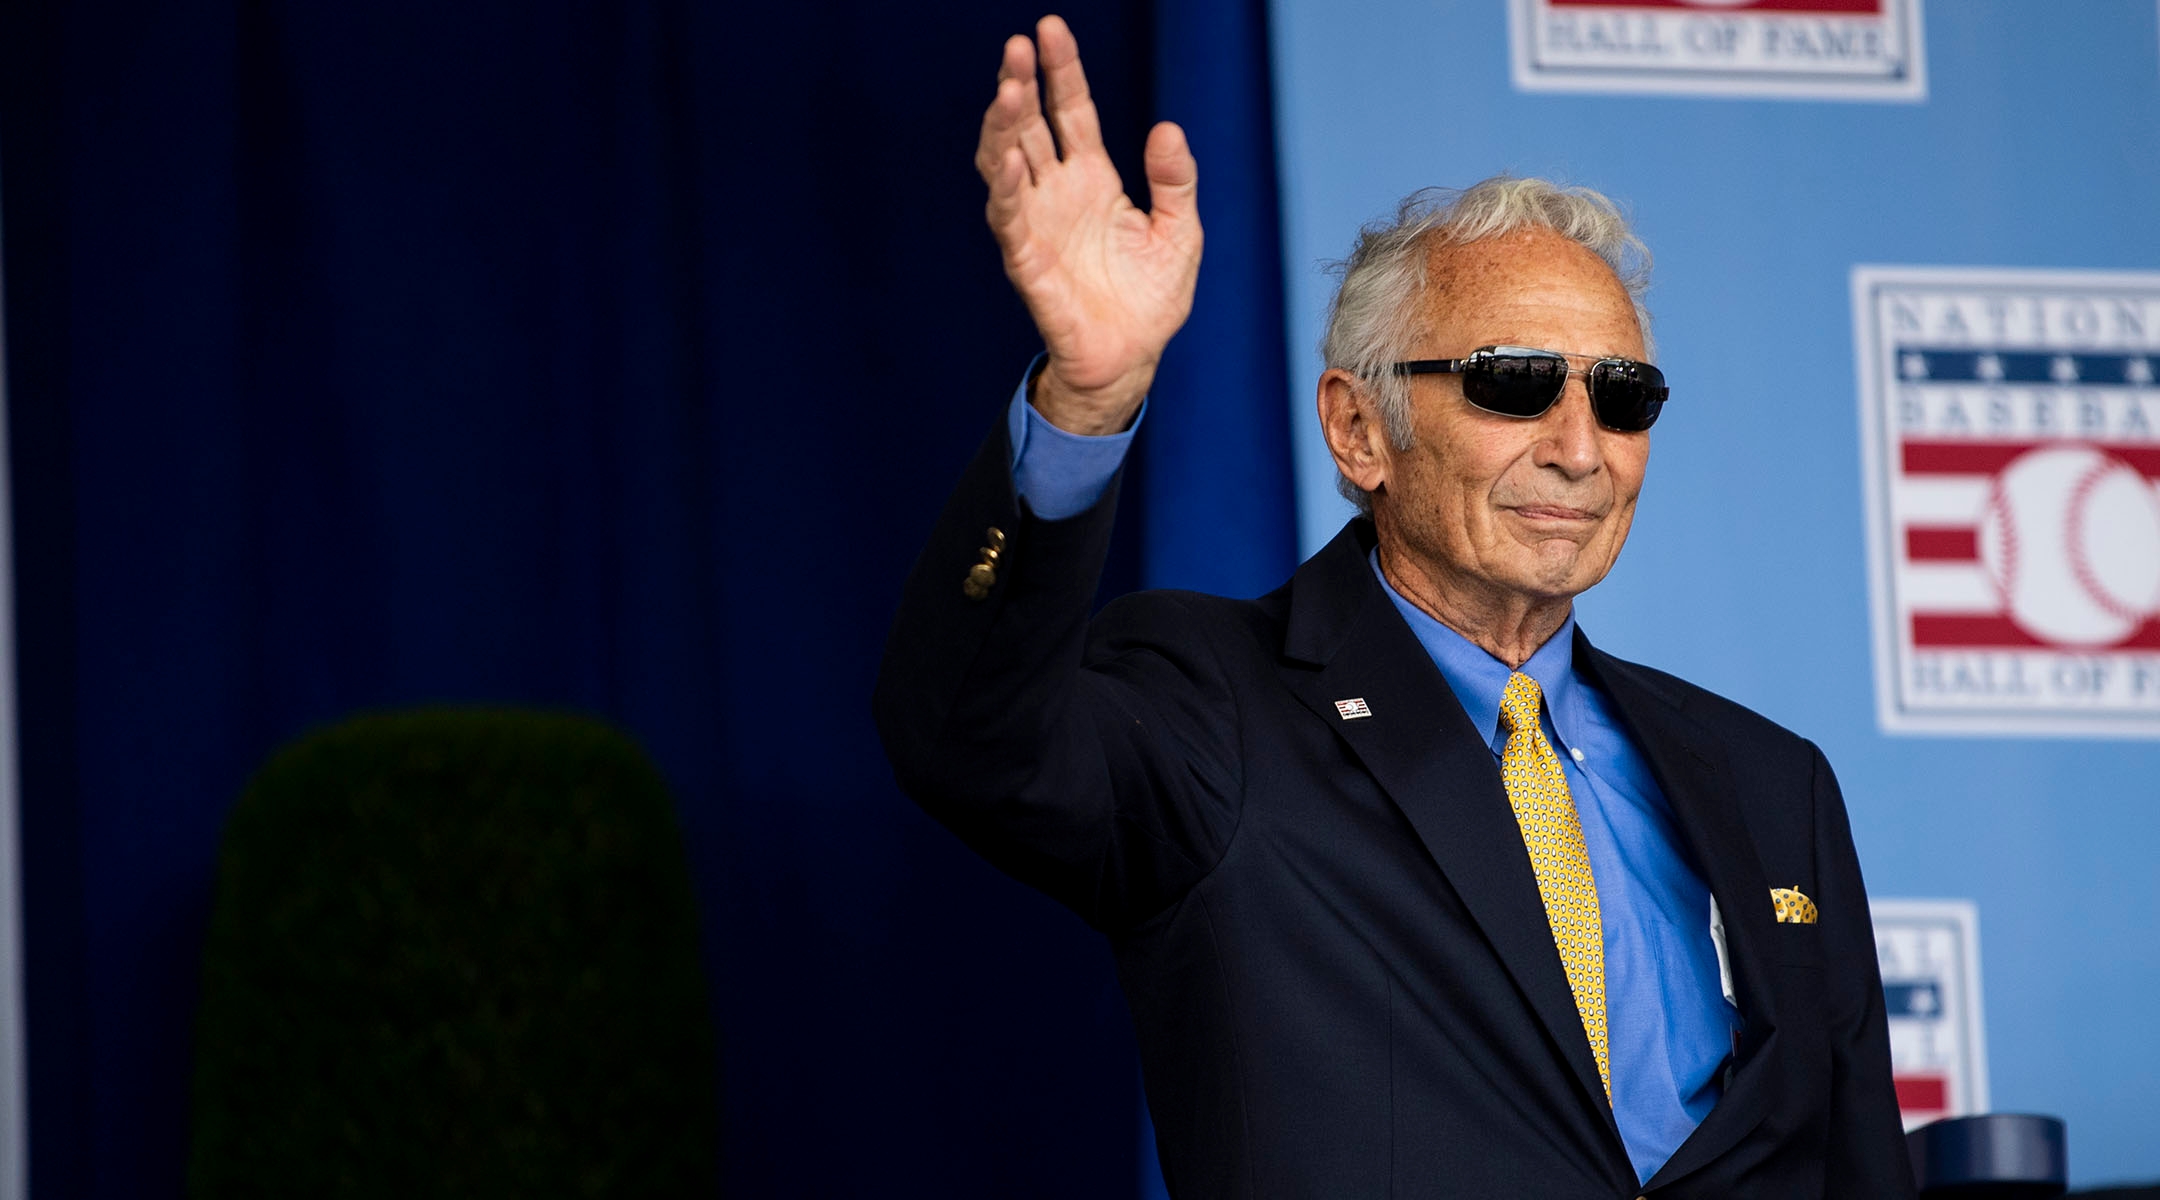 The Jewish Sport Report: Vin Scully’s perfect call of Sandy Koufax’s perfect game